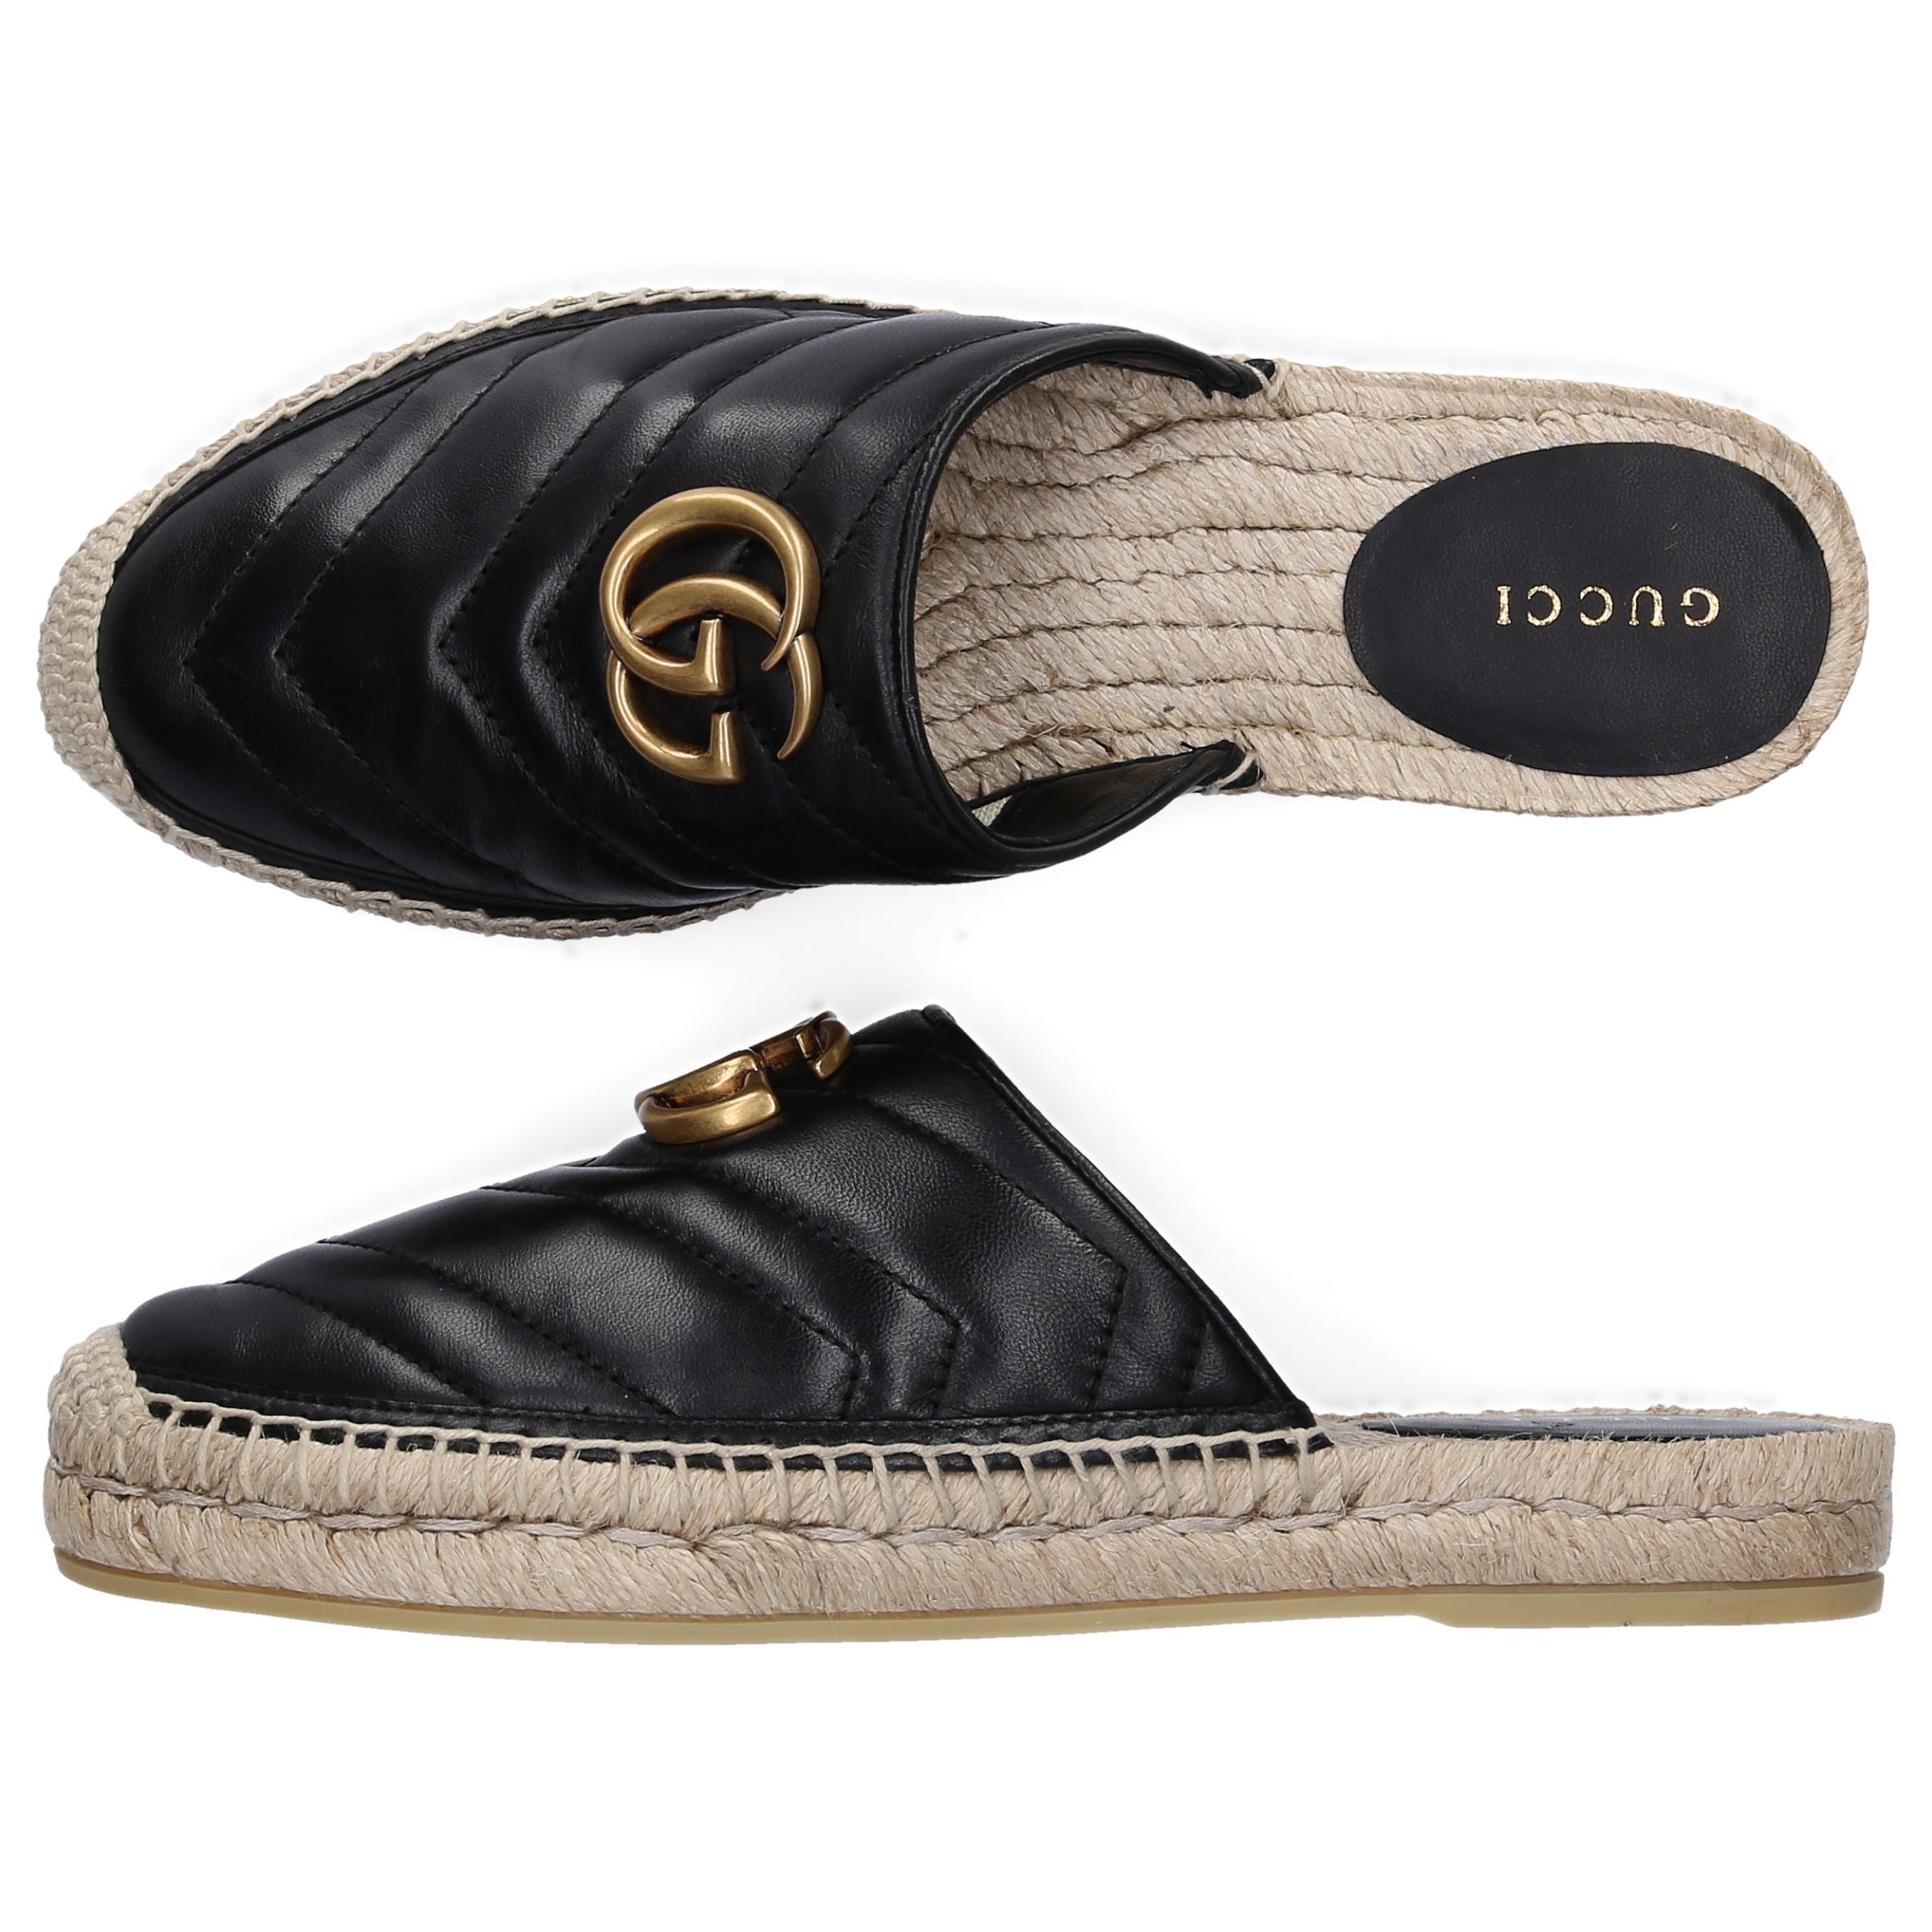 Gucci Leather Slip On Shoes Bko00 in Black - Lyst